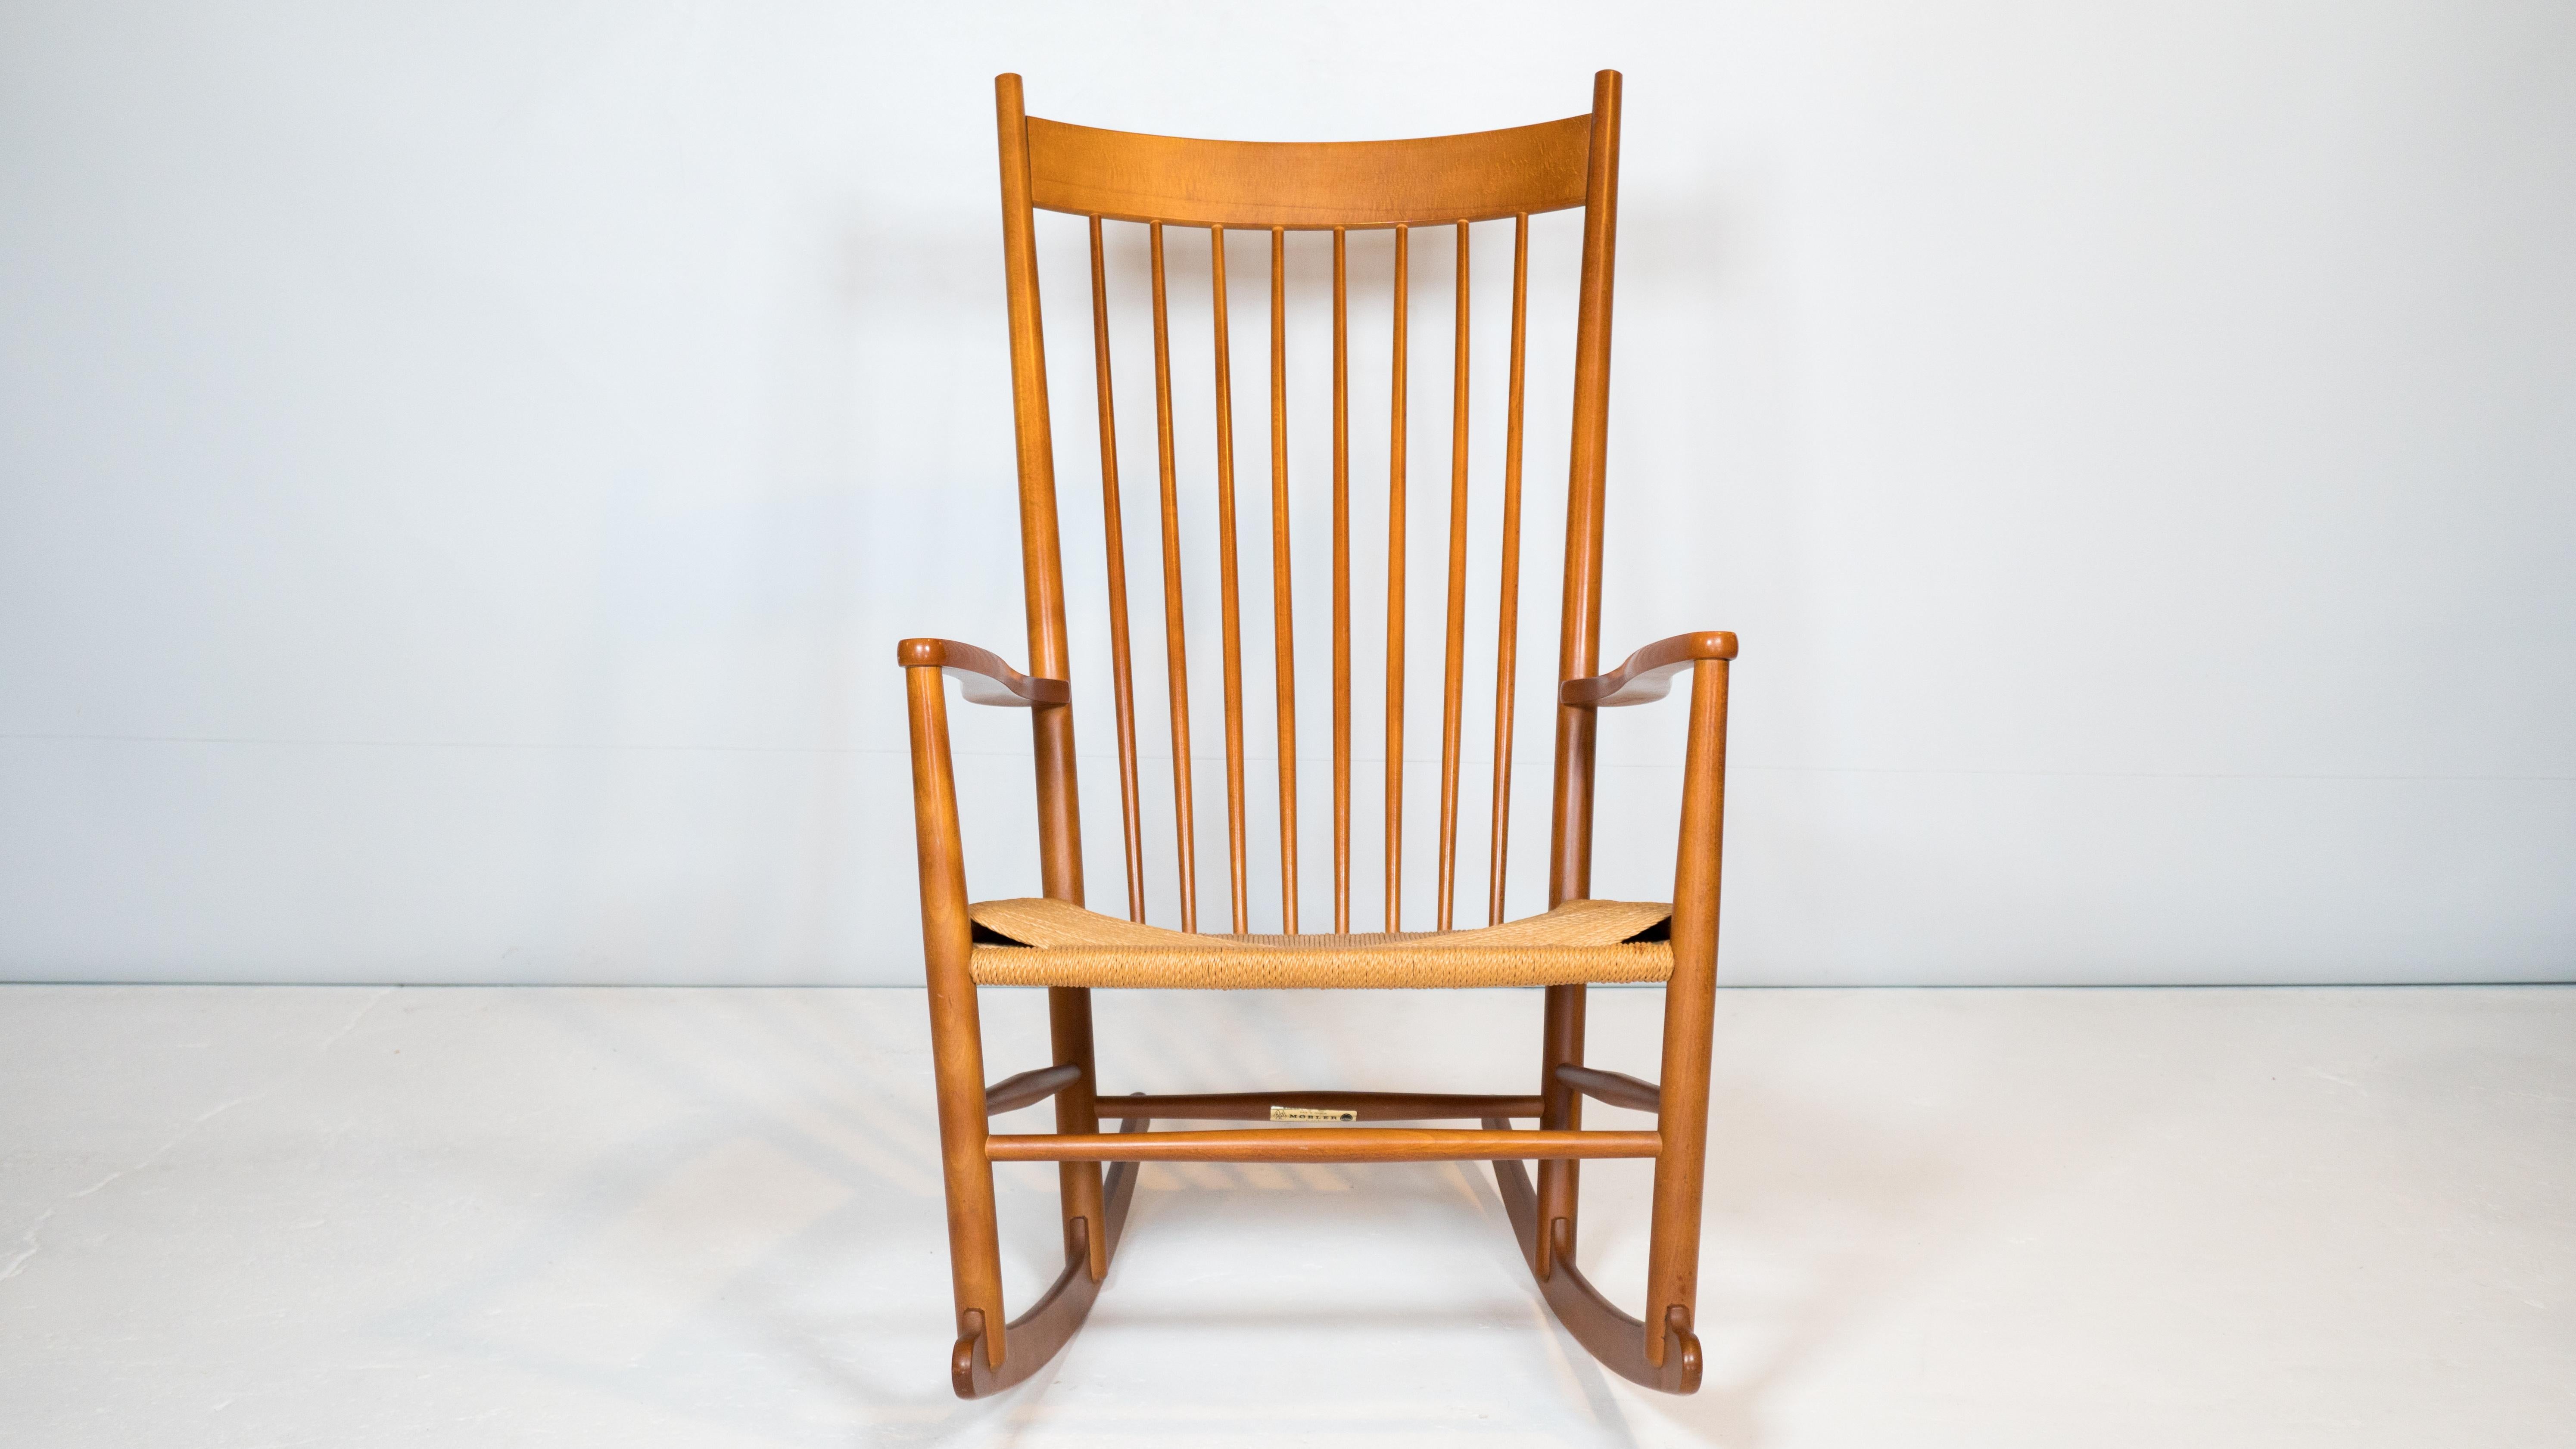 Mid Century Danish Modern 'Model J16' rocking chair by Hans Wegner for FDB Møbler, circa 1970s. Solid lacquered beech wood frame with woven paper cord seat. Great lines and craftsmanship. Great vintage condition. Manufacturer label present. Made in